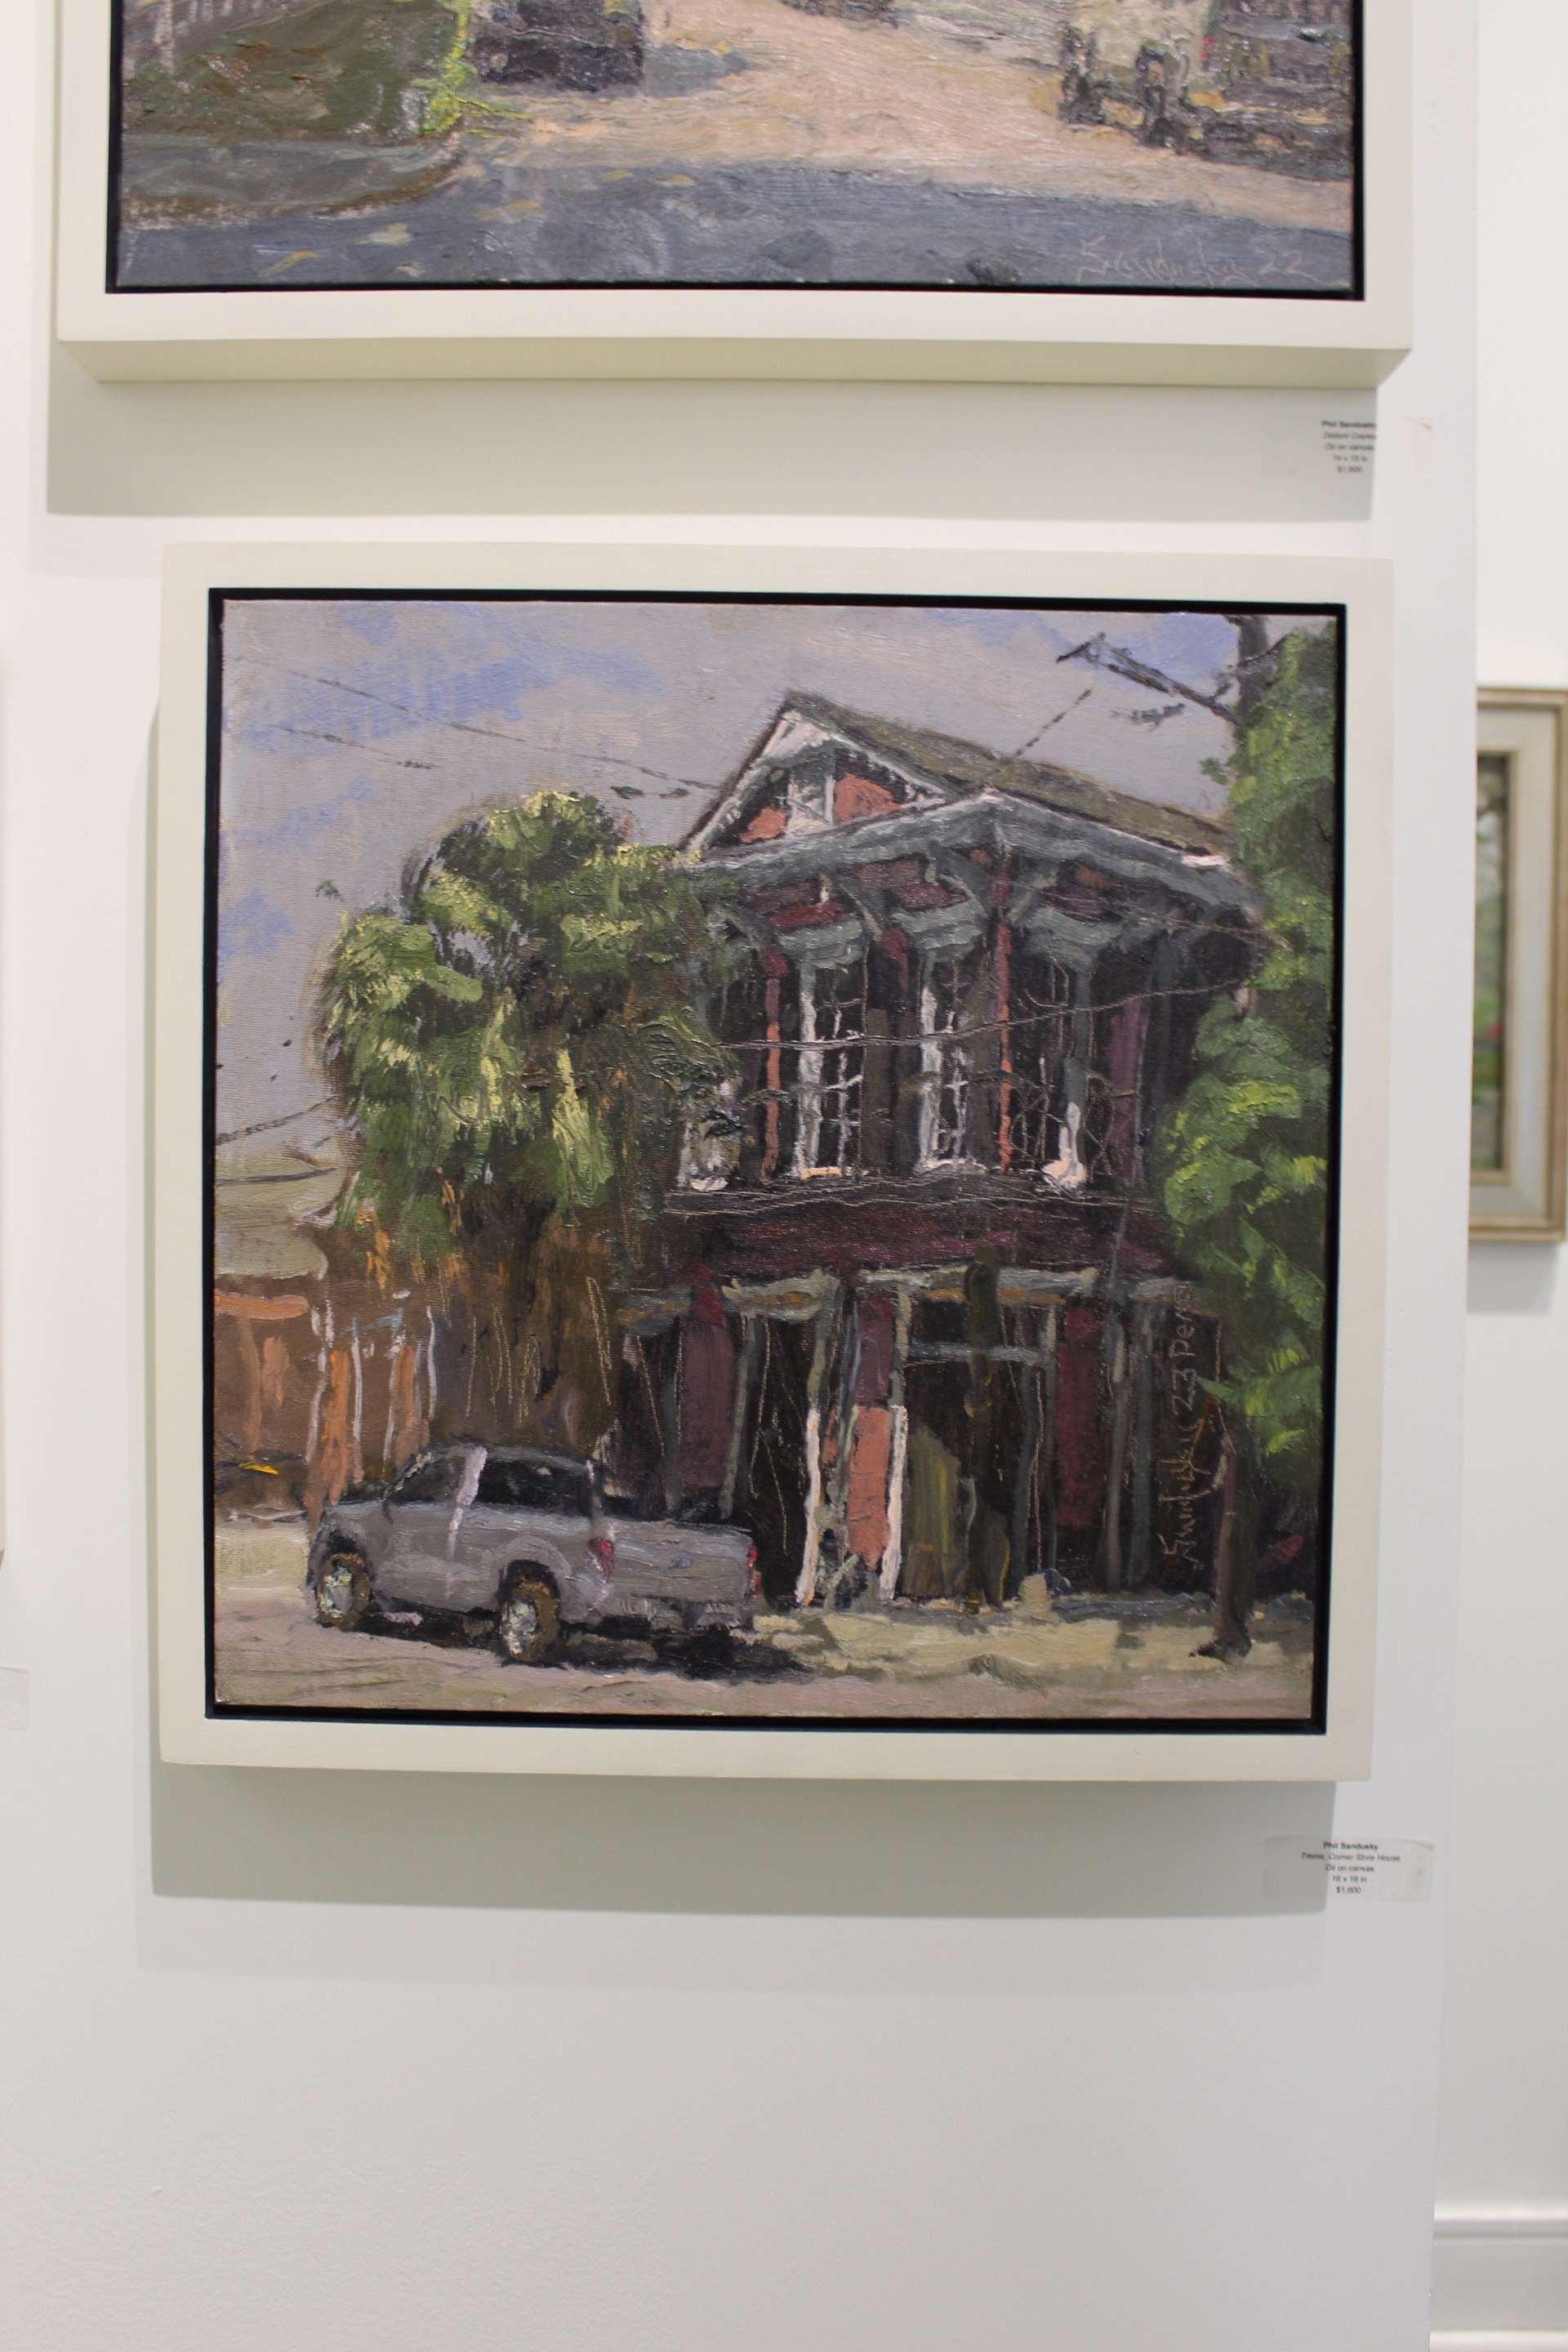 Treme, Corner Store House with Gray Pickup by Phil Sandusky